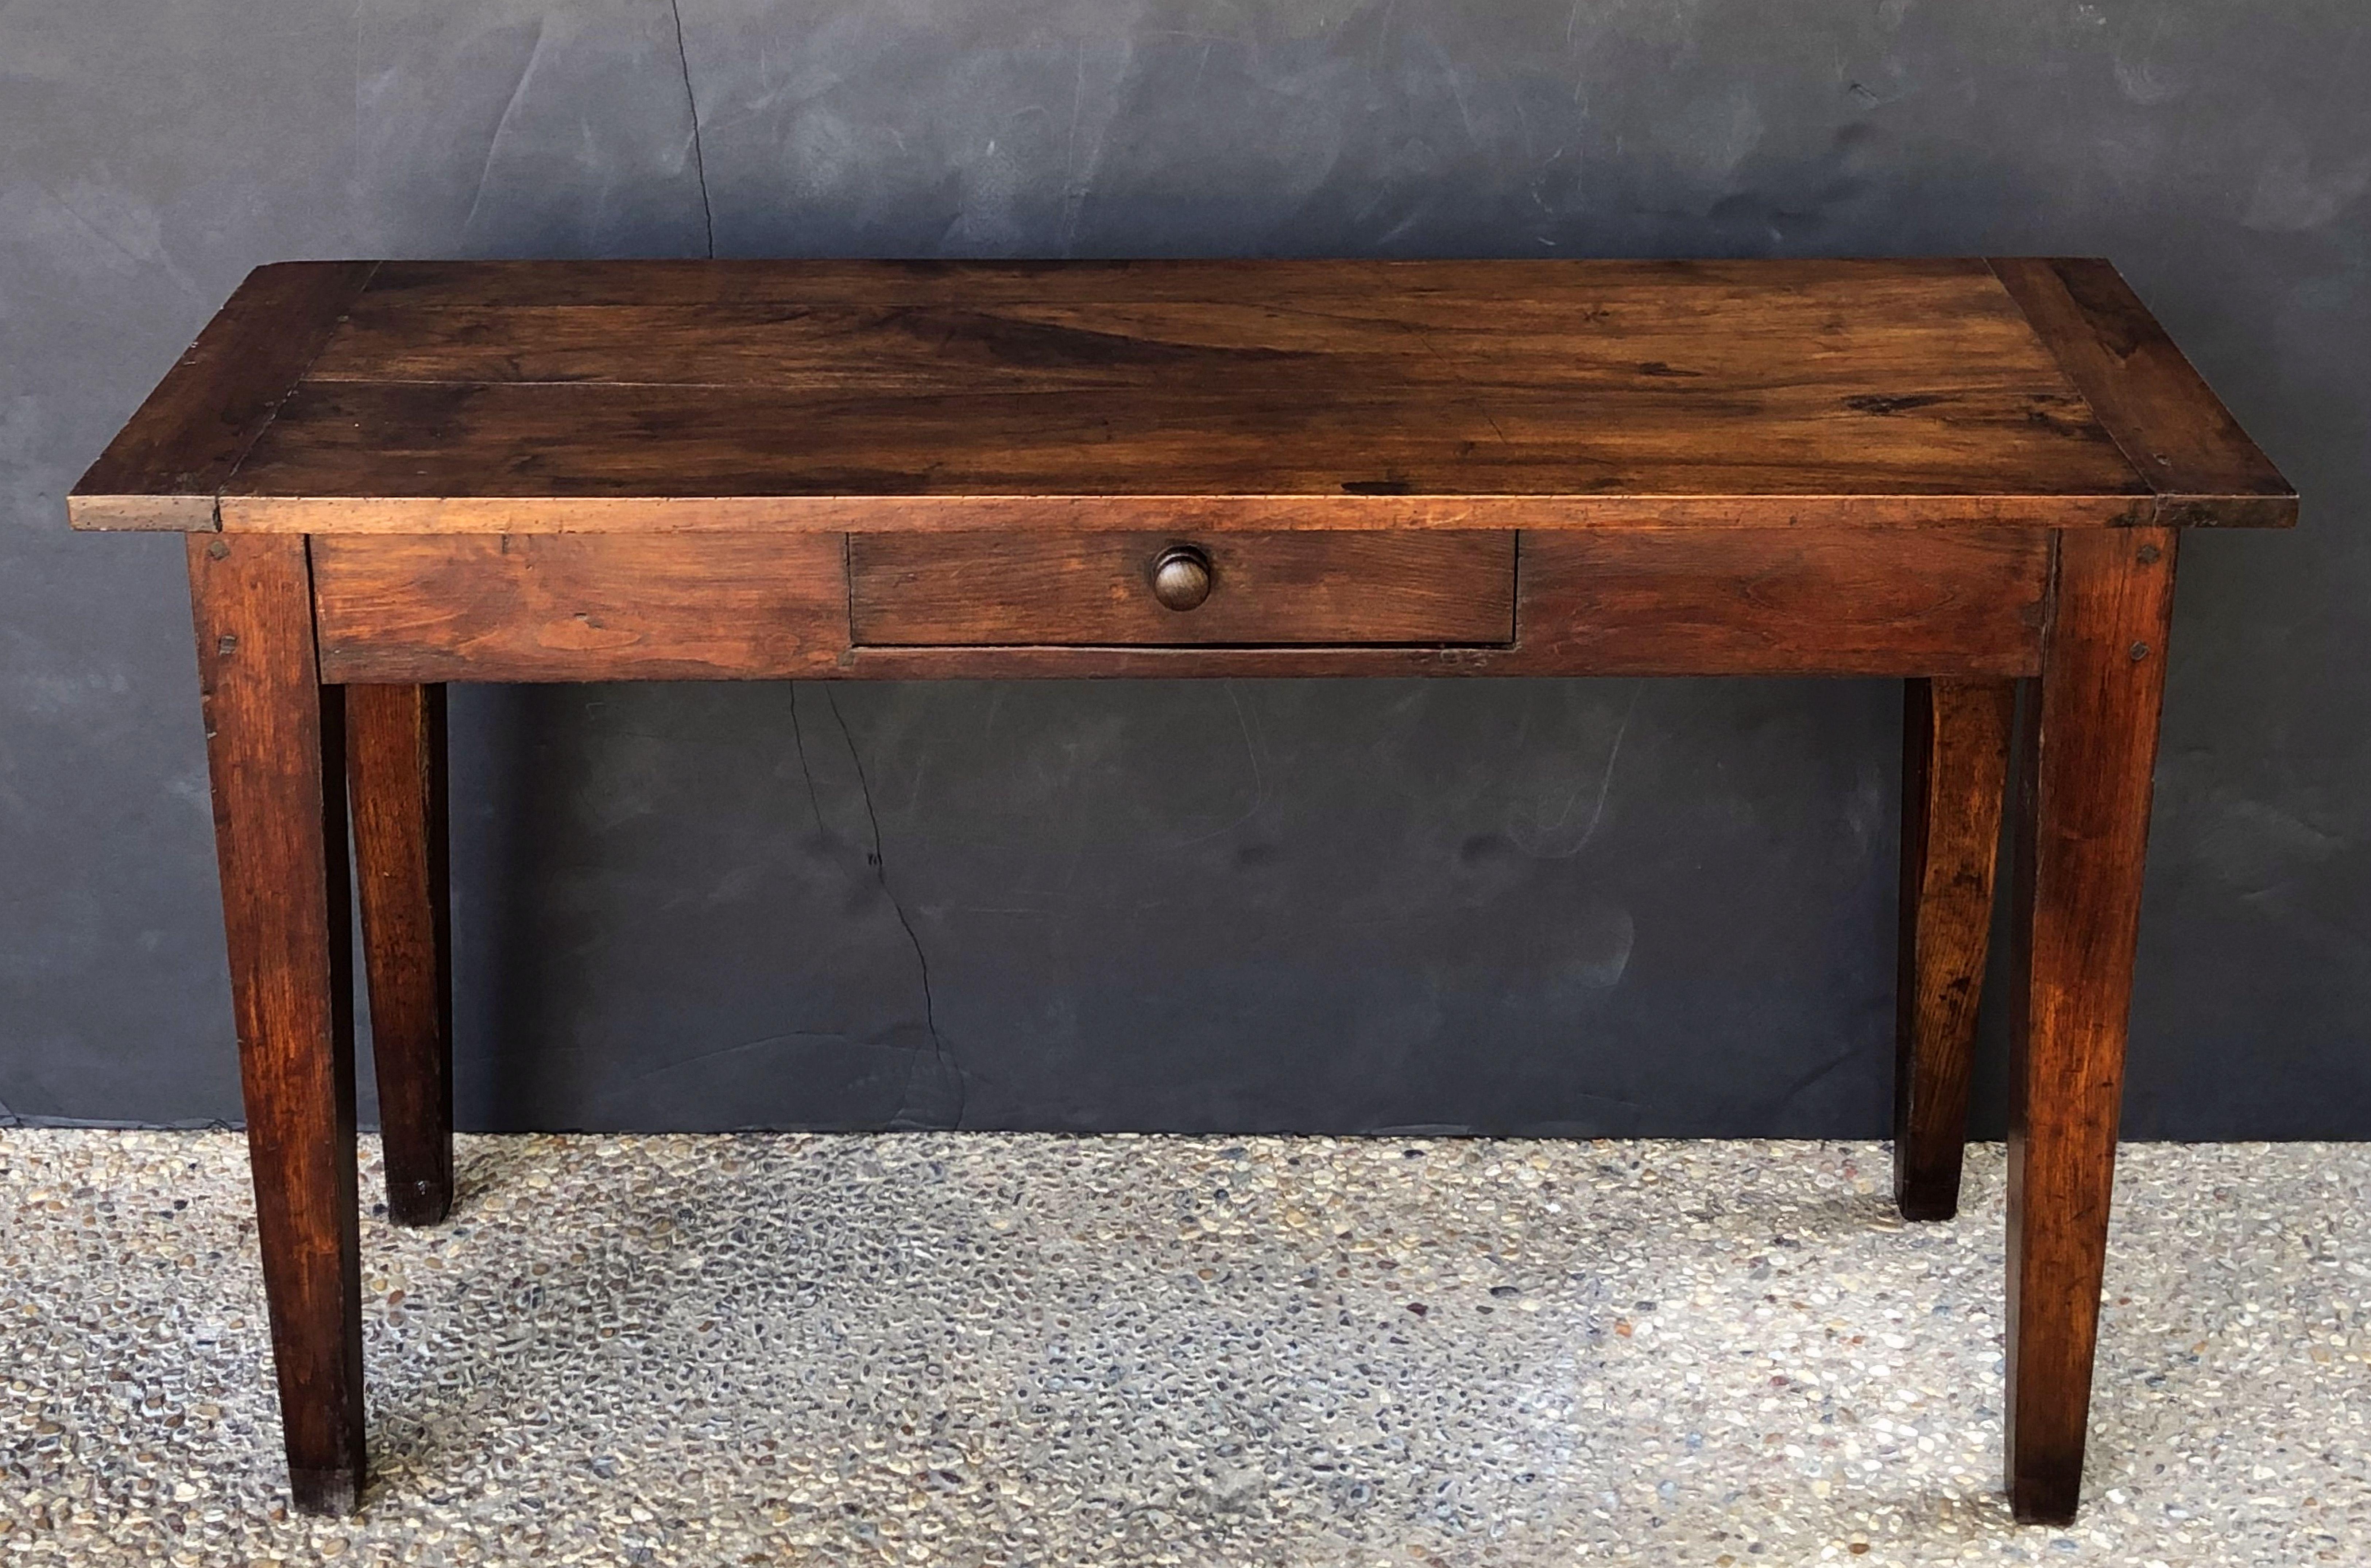 A fine French console sideboard (or serving table) of walnut, featuring a flat rectangular plank top over a frieze with one drawer, drawer with knob pull of turned wood, standing on tapering legs.